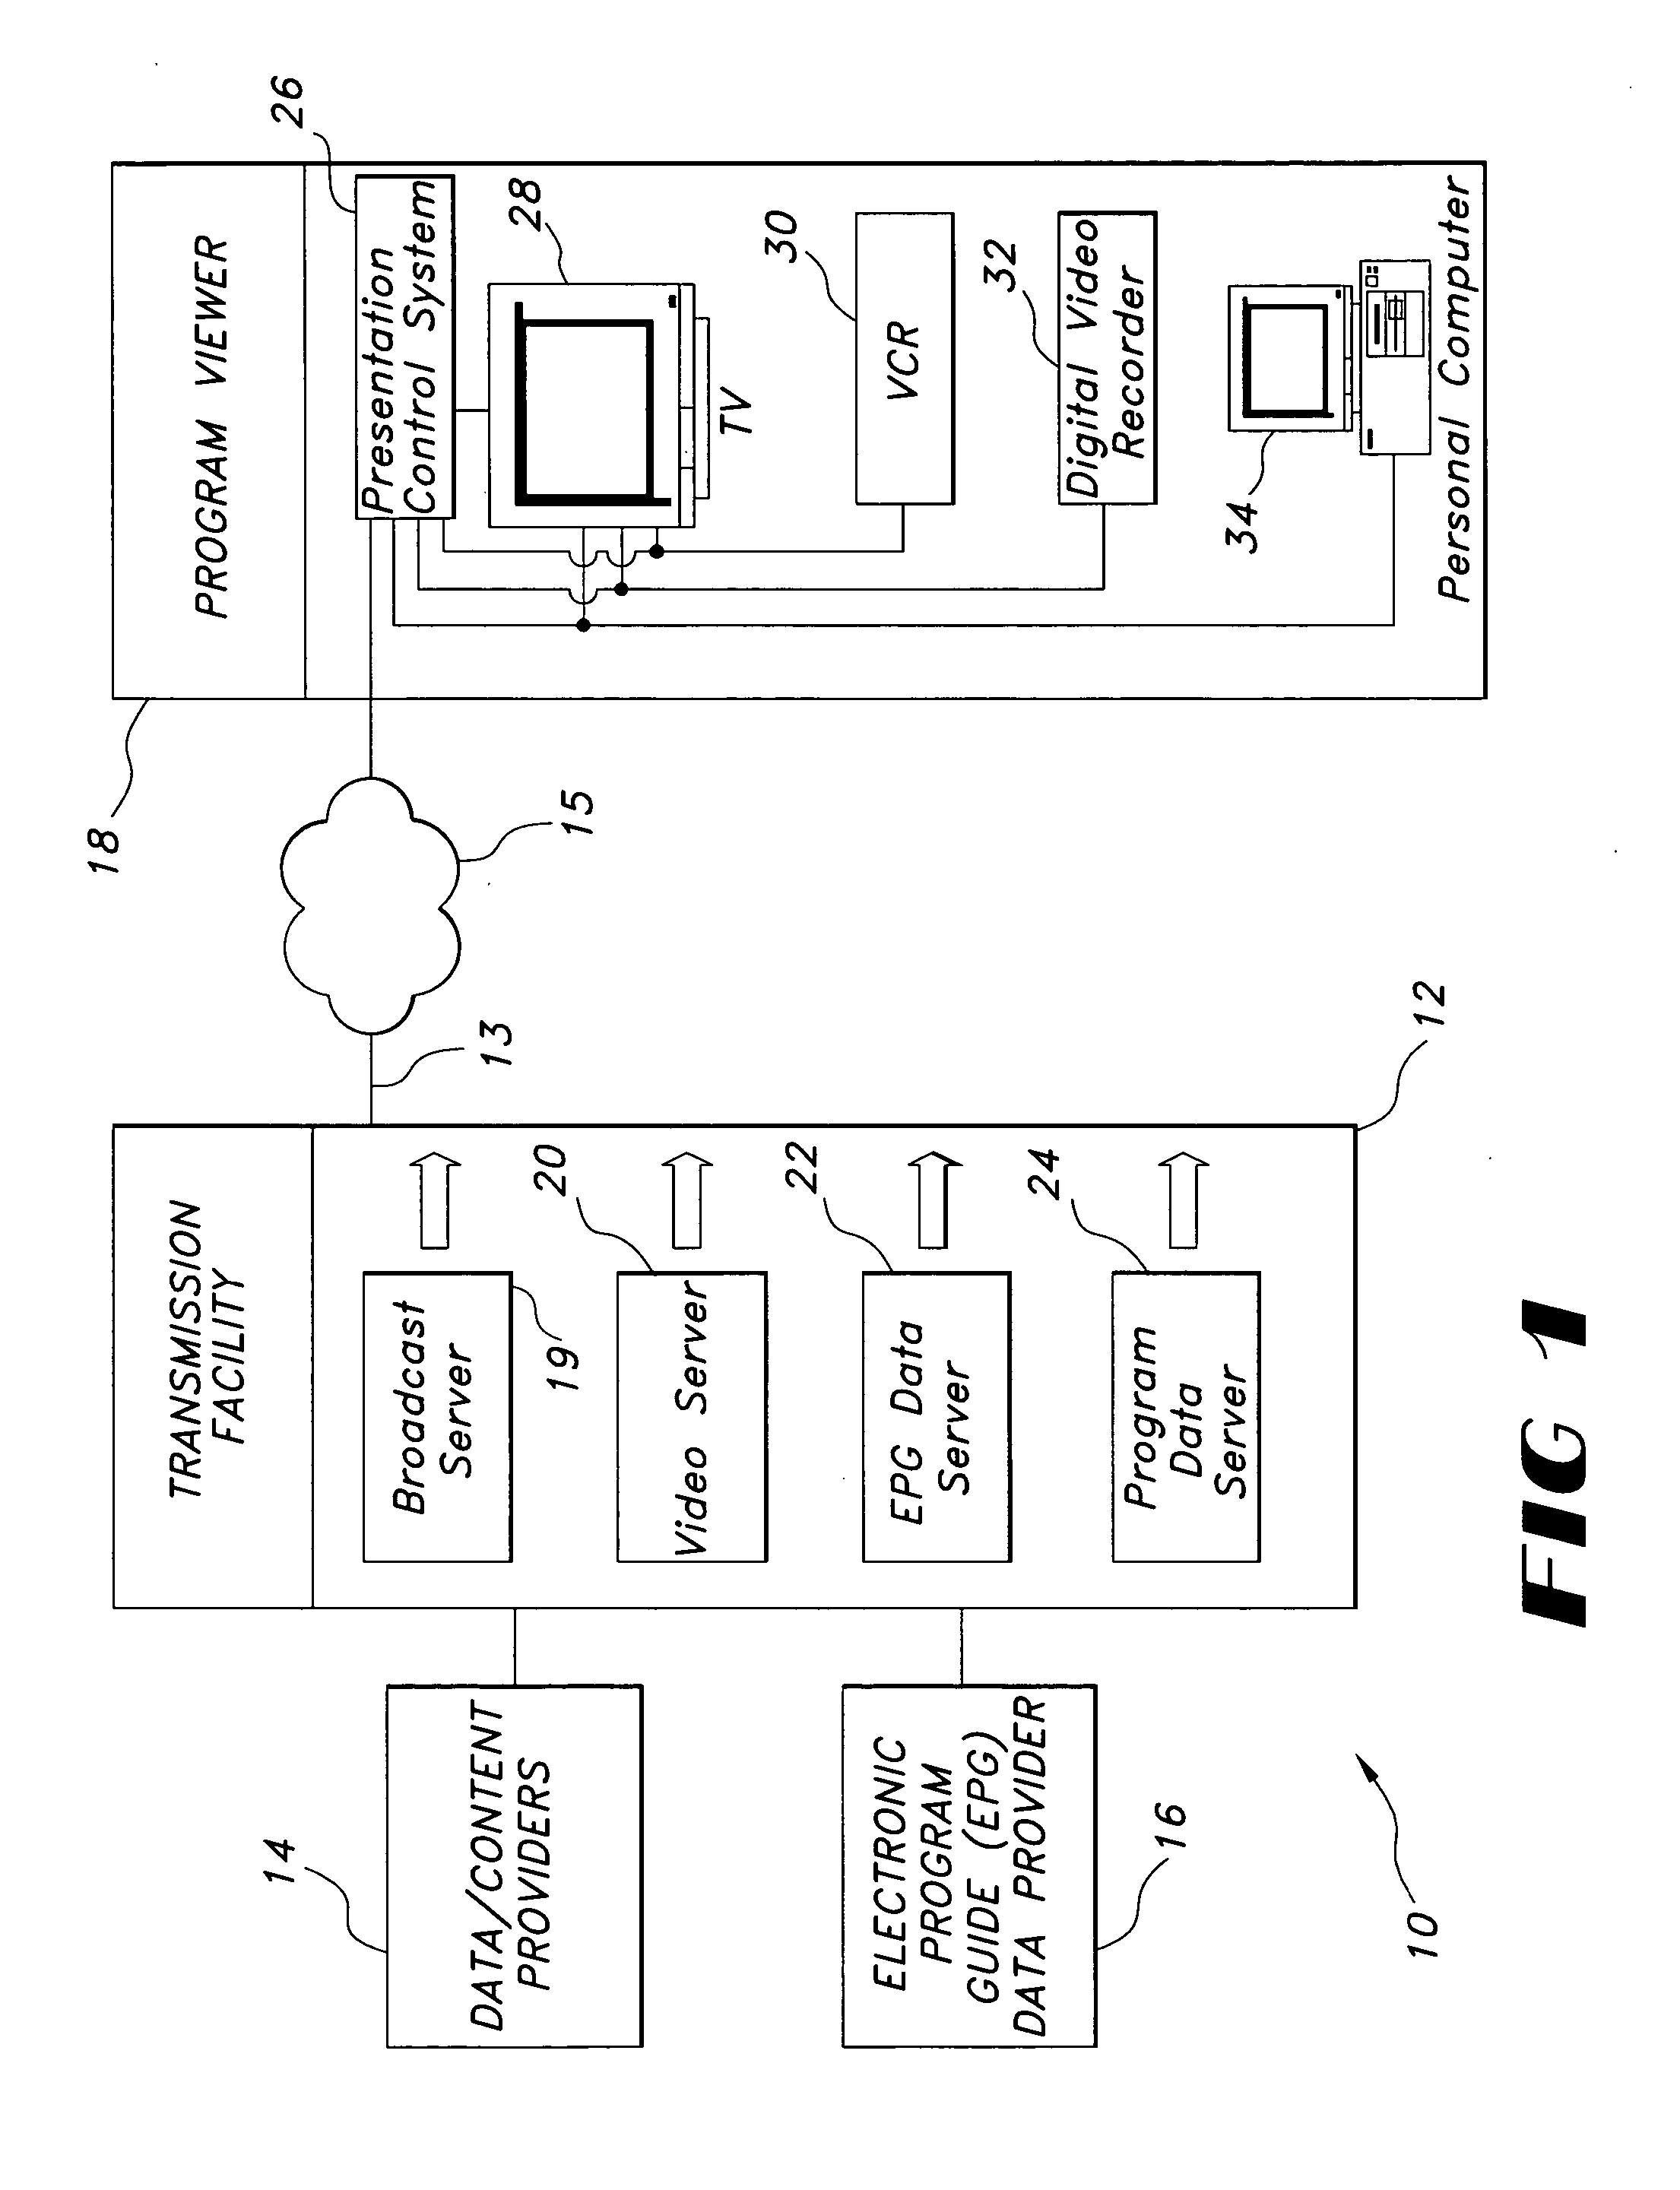 Method for formulating, delivering and managing data concerning programming content and portions thereof